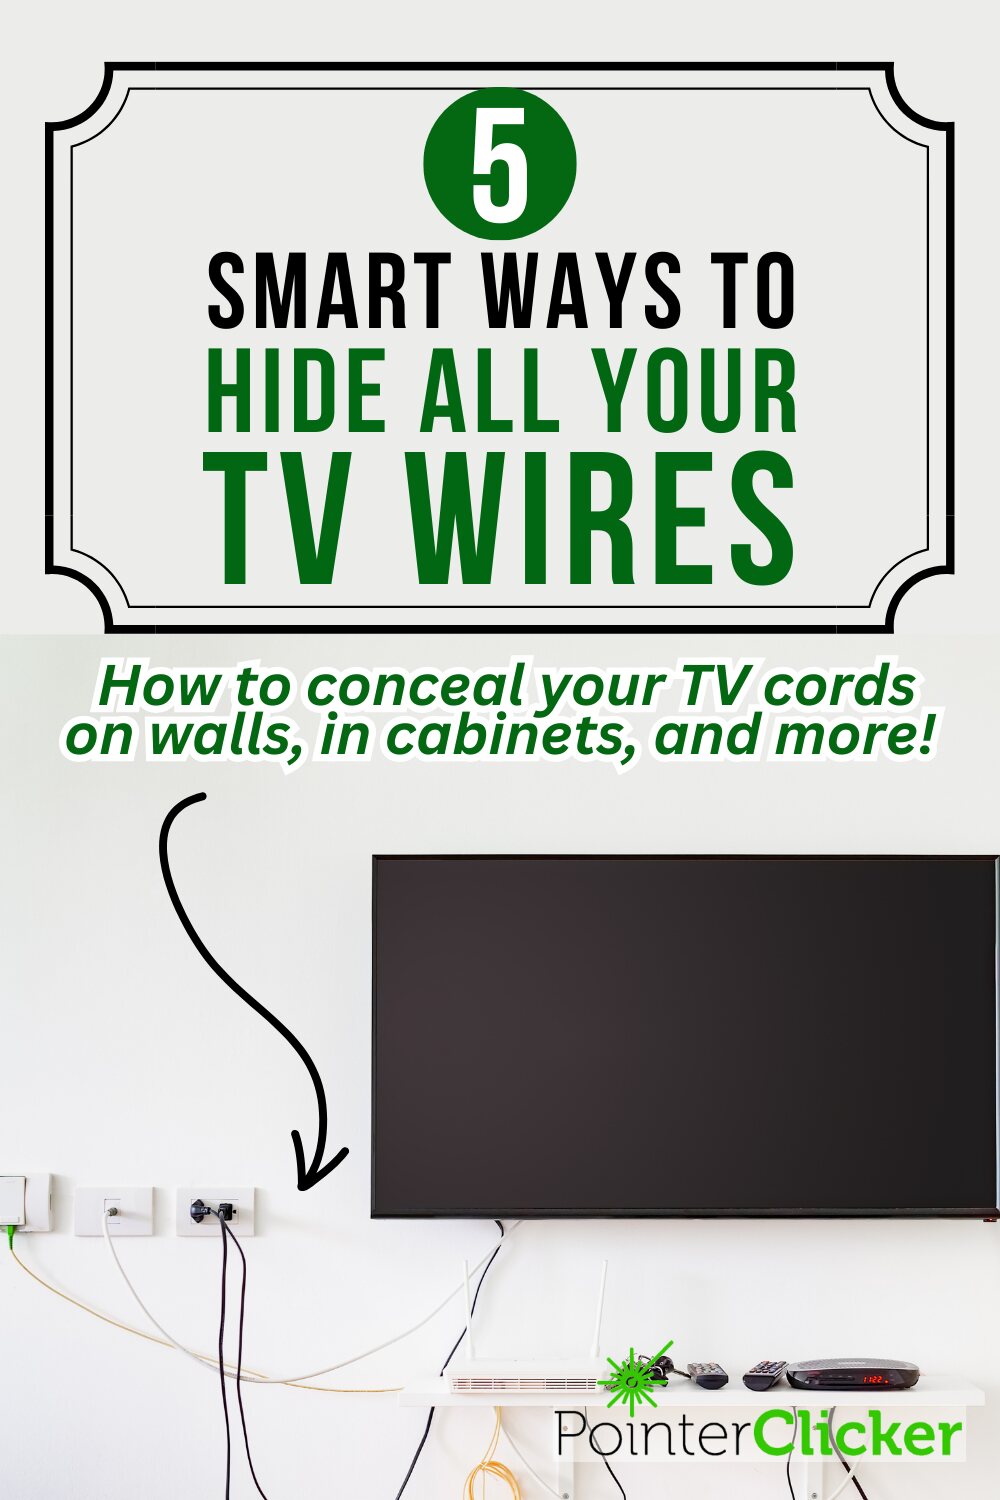 How to Hide TV Wires: A Complete Guide to Concealing Cables